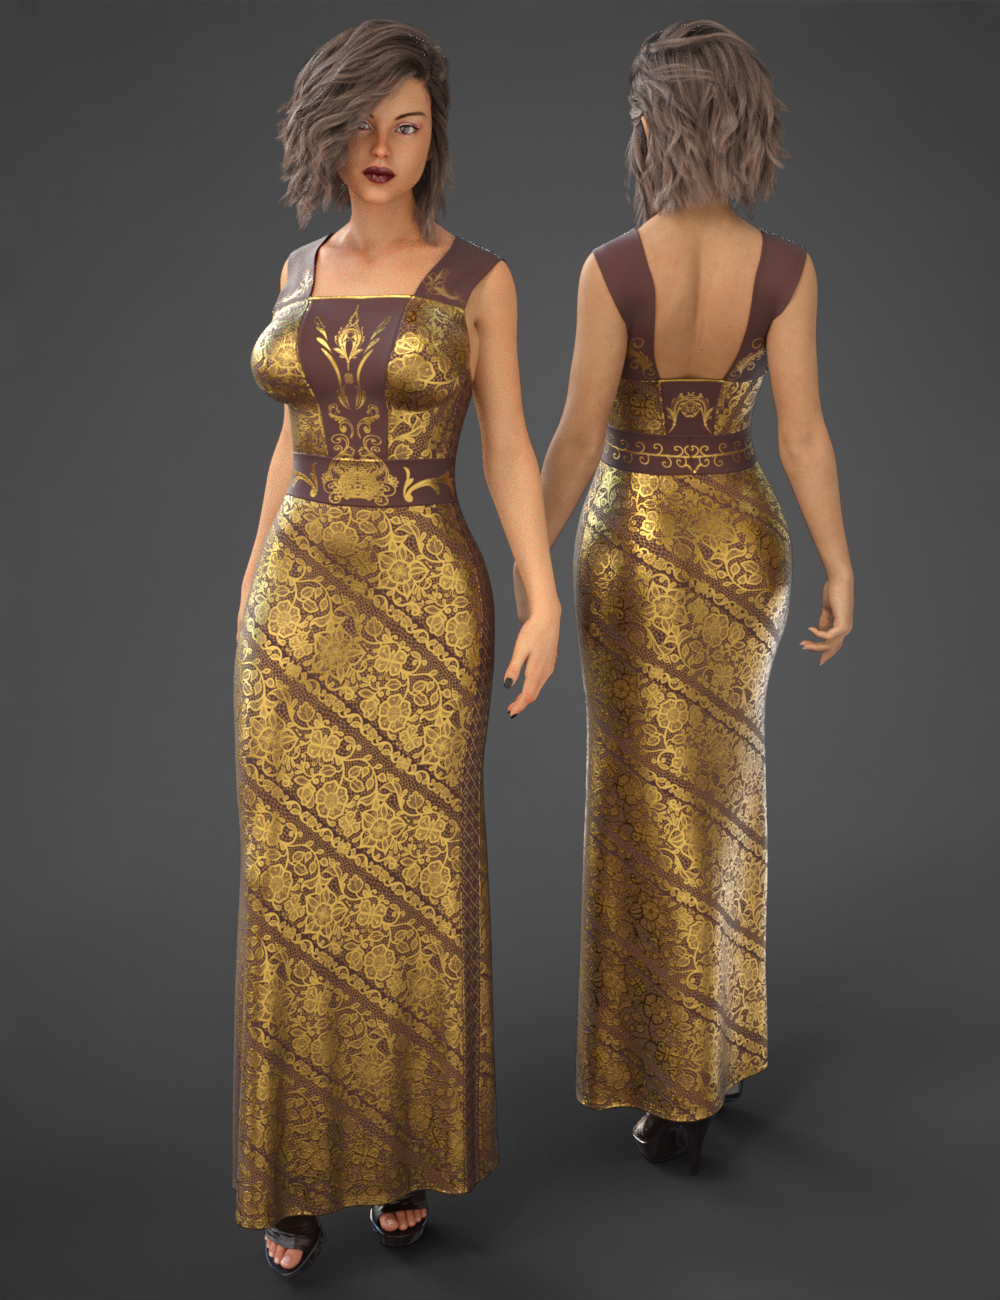 dForce COG Evening Dress Texture Pack by: CatOnGlade, 3D Models by Daz 3D